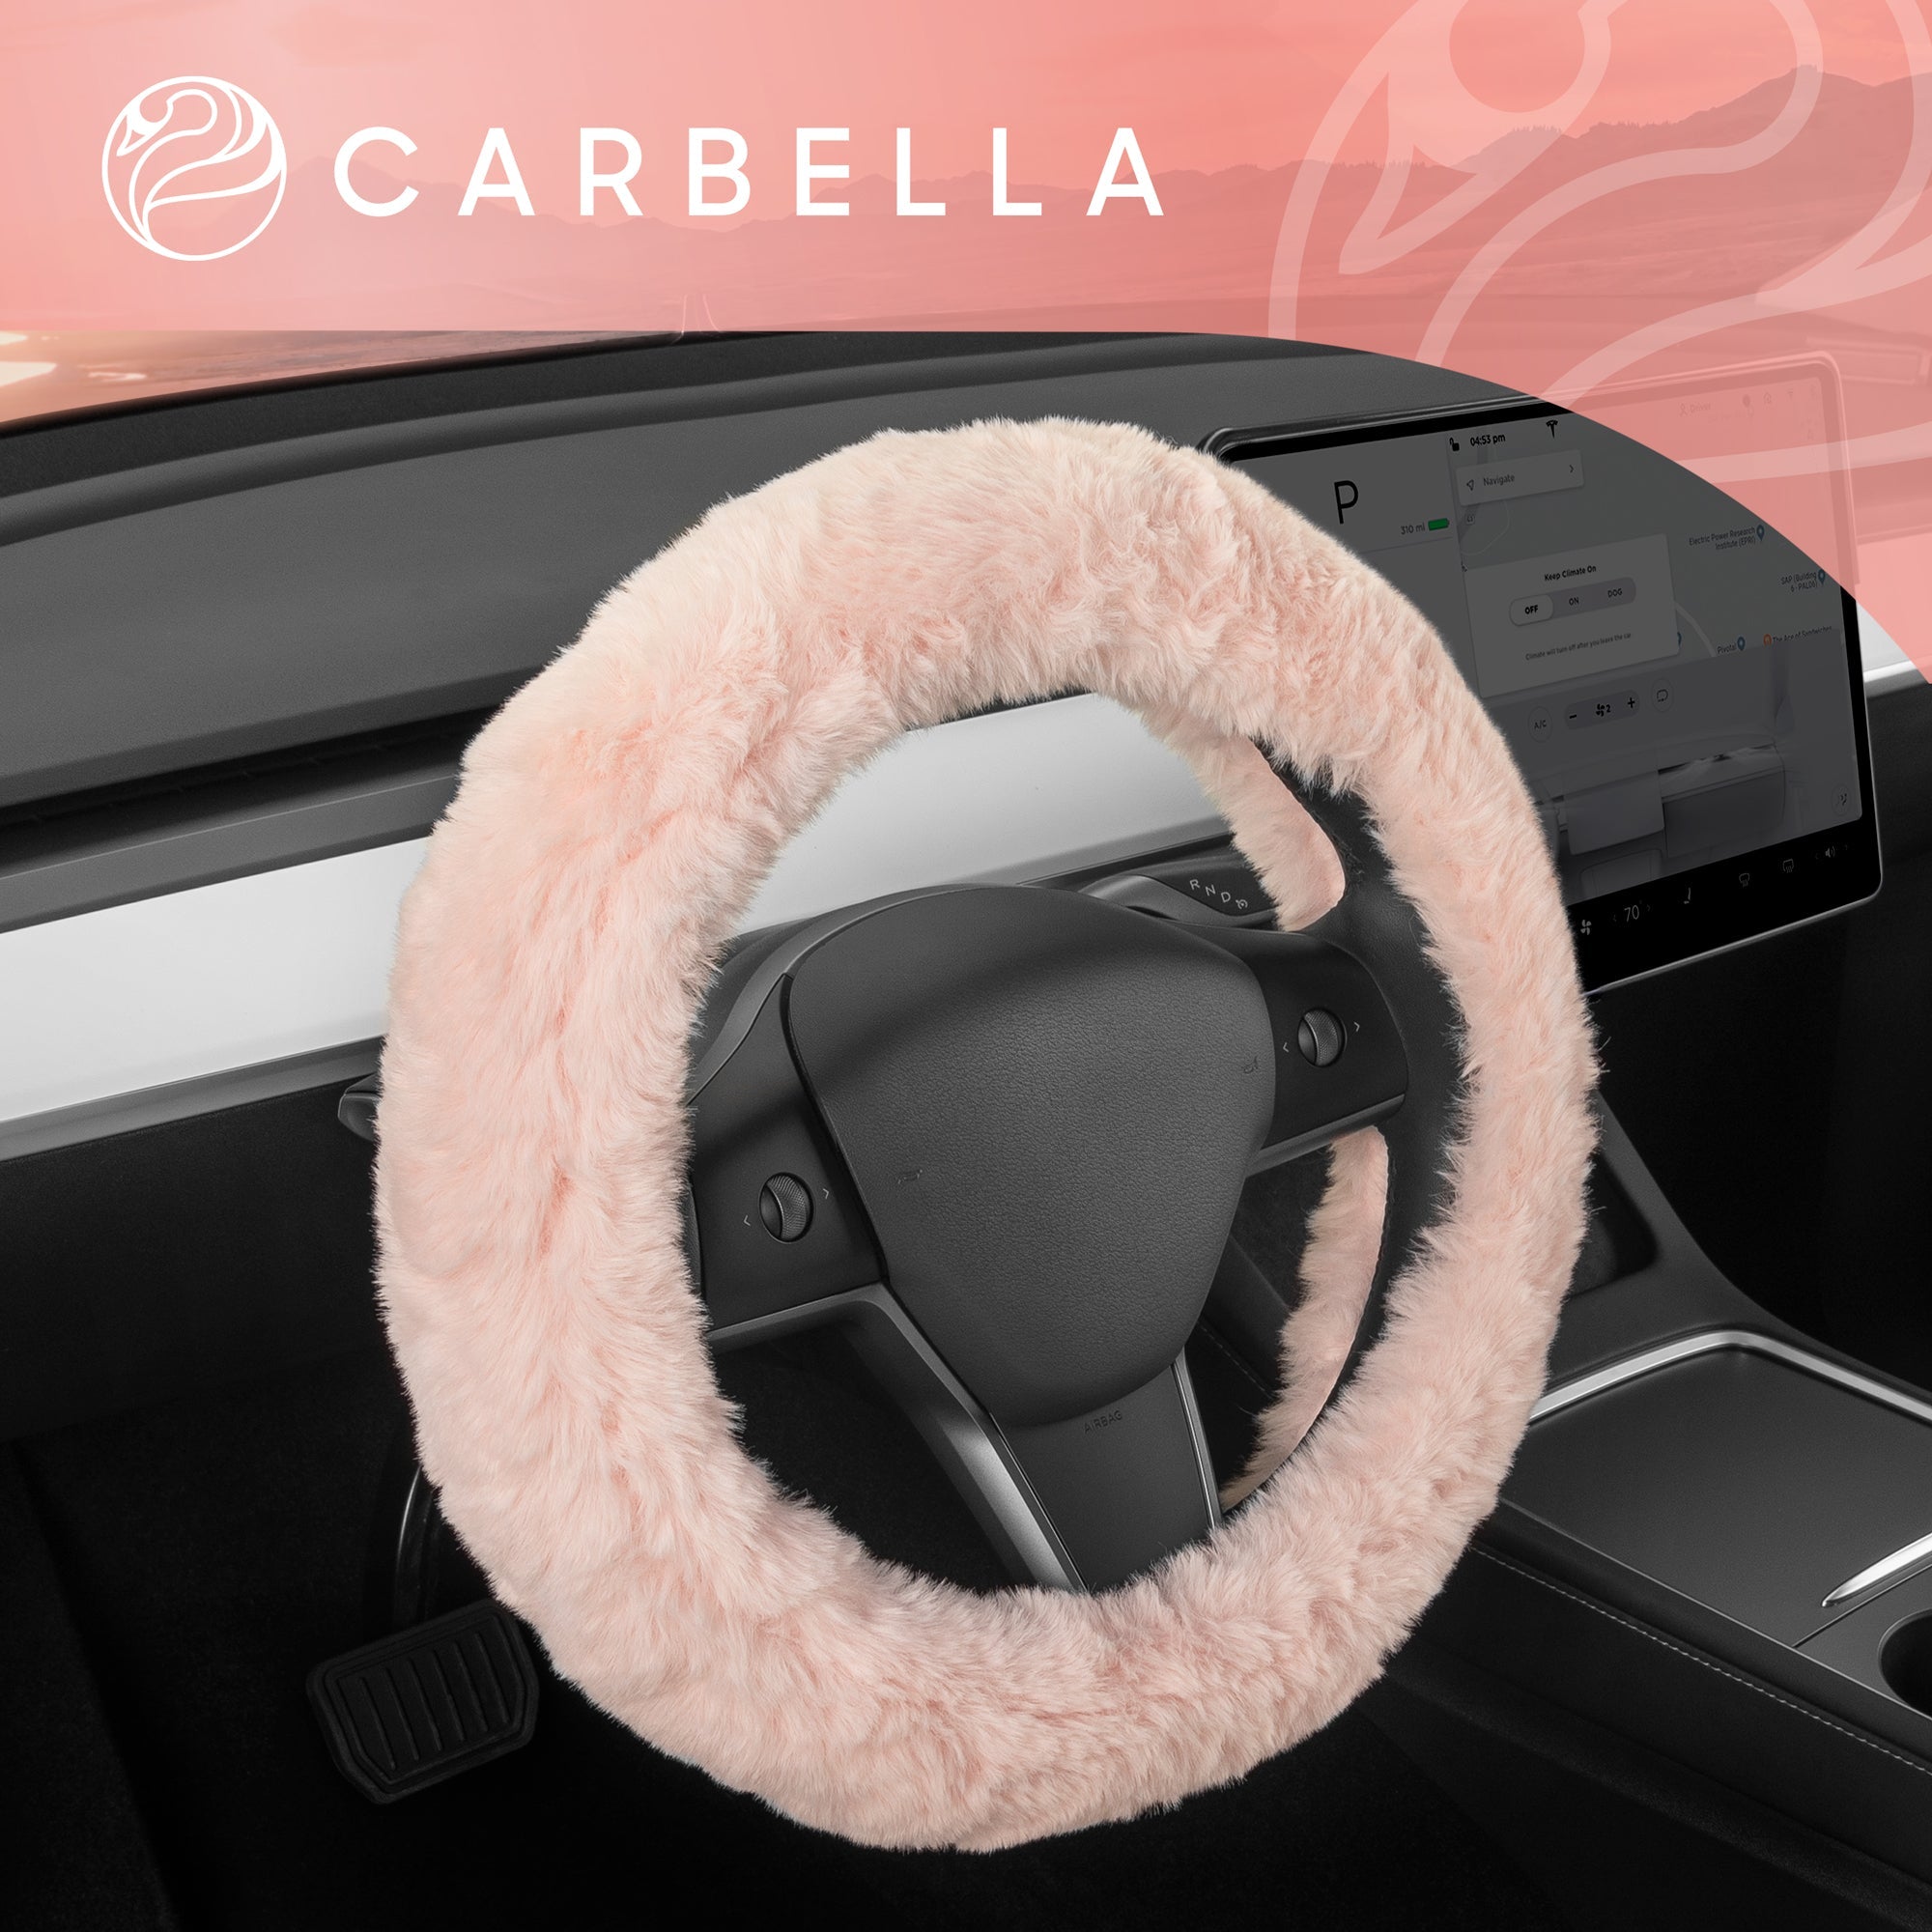 Carbella Soft Pink Fuzzy Steering Wheel Cover, Standard 15 Inch Size Fits Most Vehicles, Cute Faux Fur Car Steering Cover with Soft Fluffy Furry Touch, Car Accessories for Women - Soft Pink:#FFCCCC